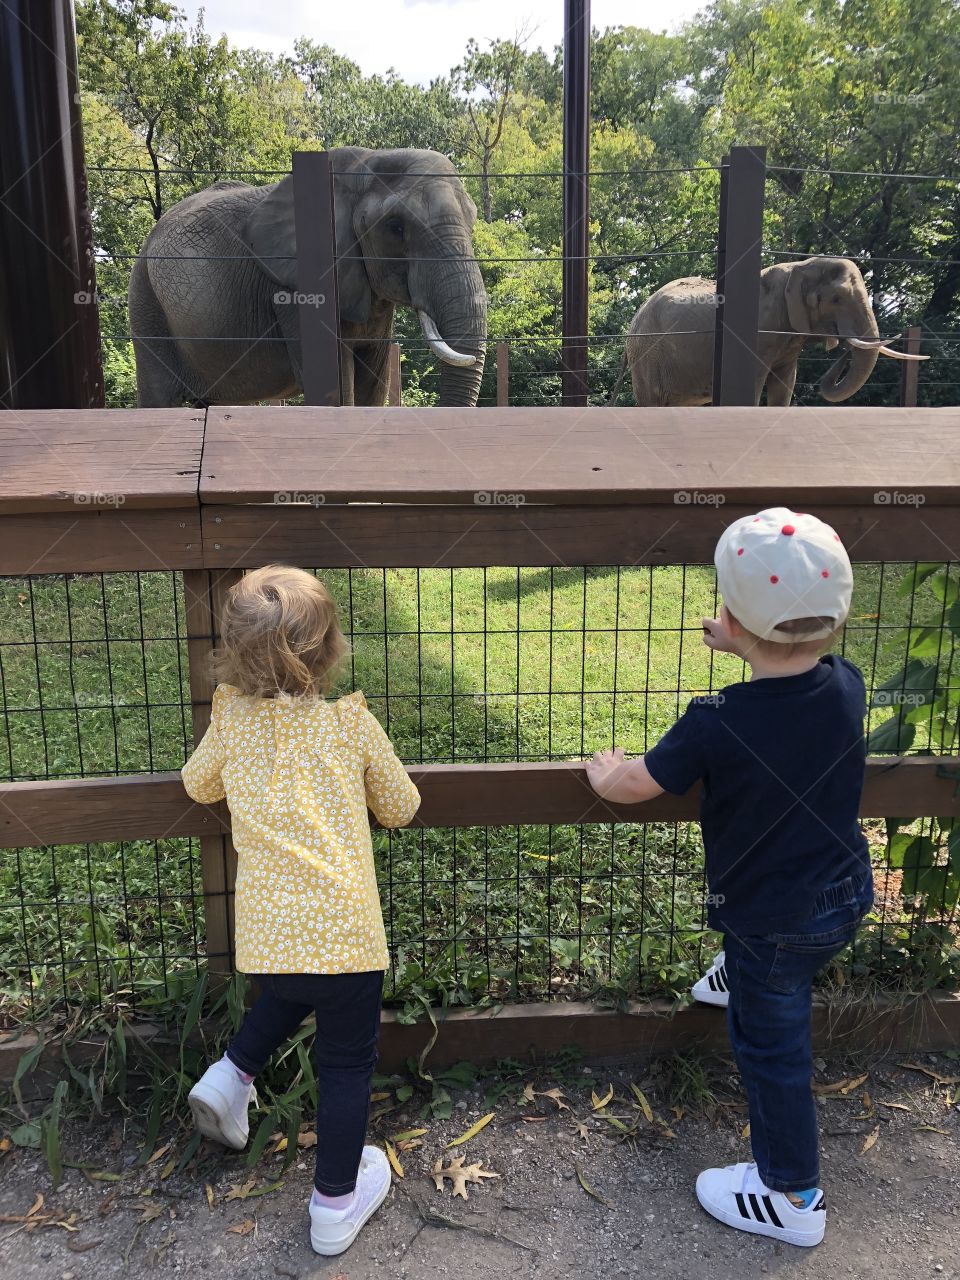 A day at the zoo 